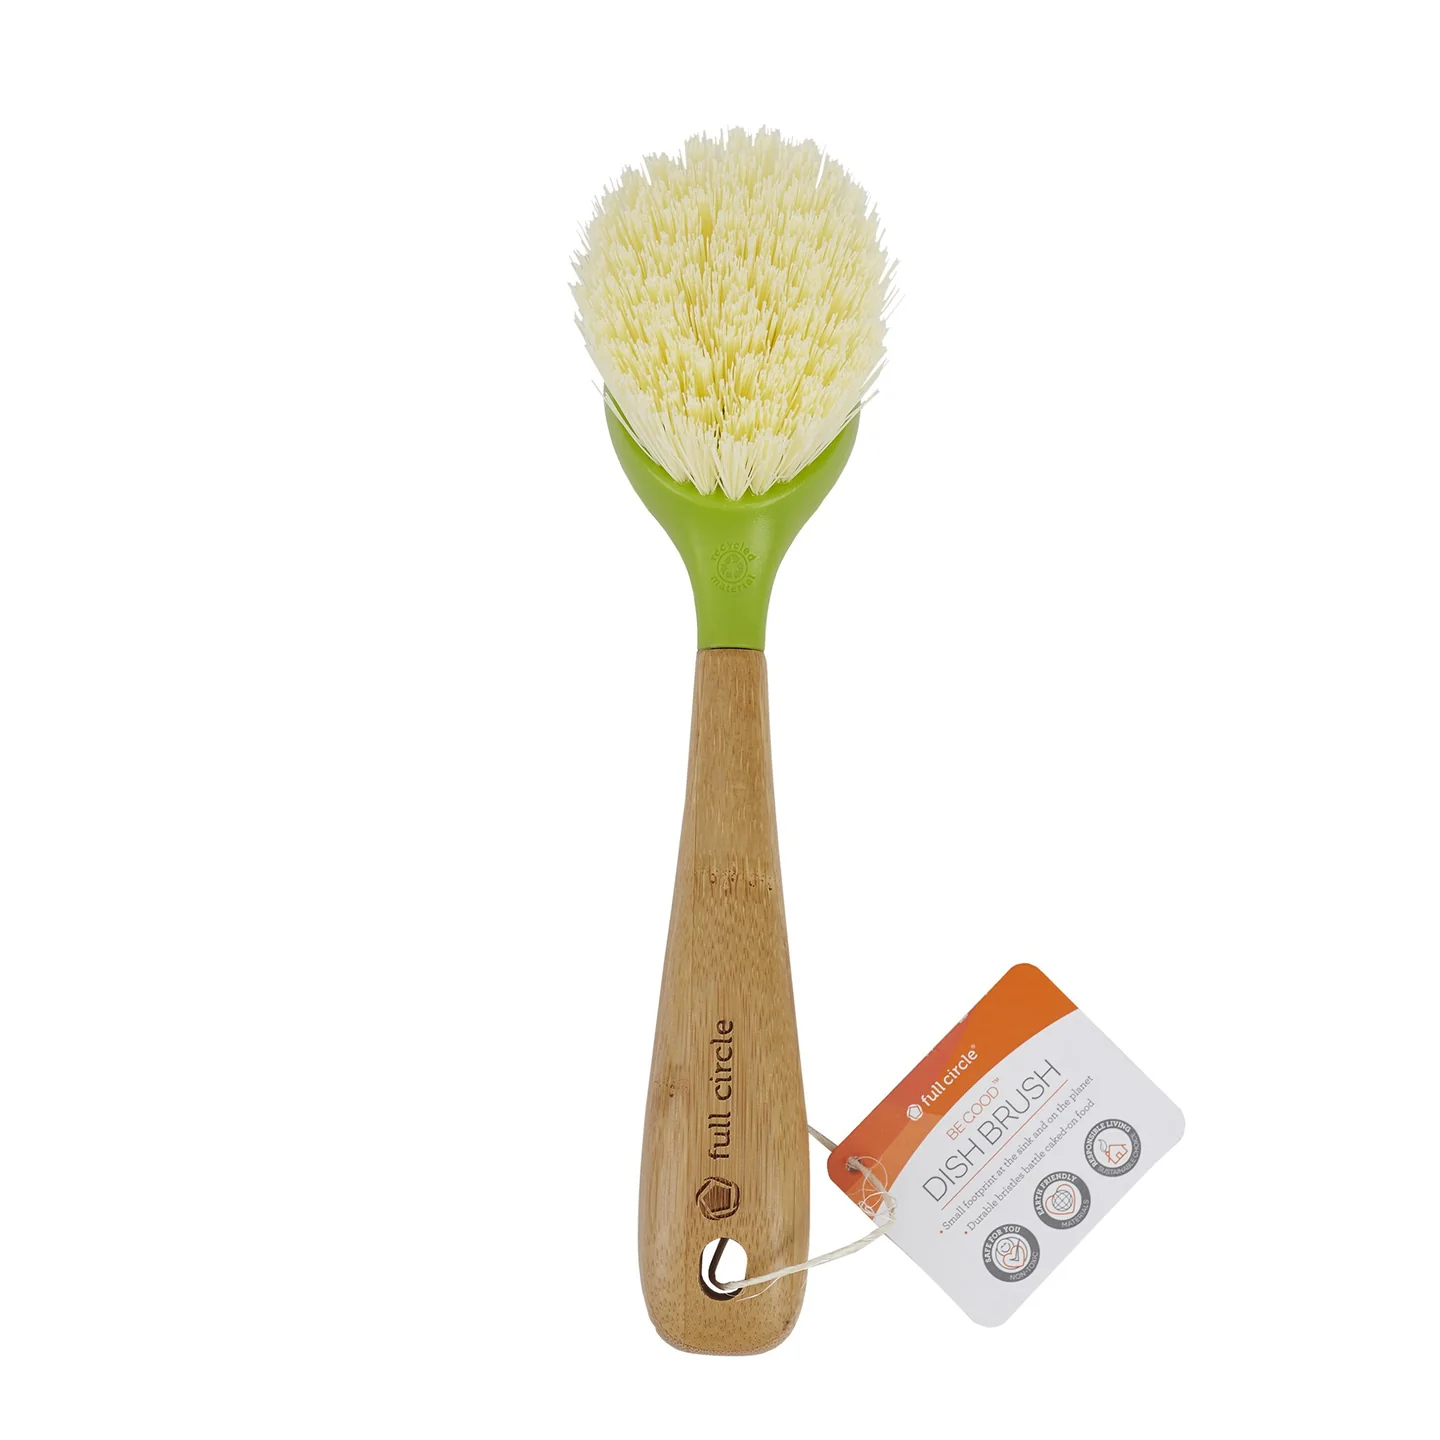 Full Circle Dish Scrubber Review